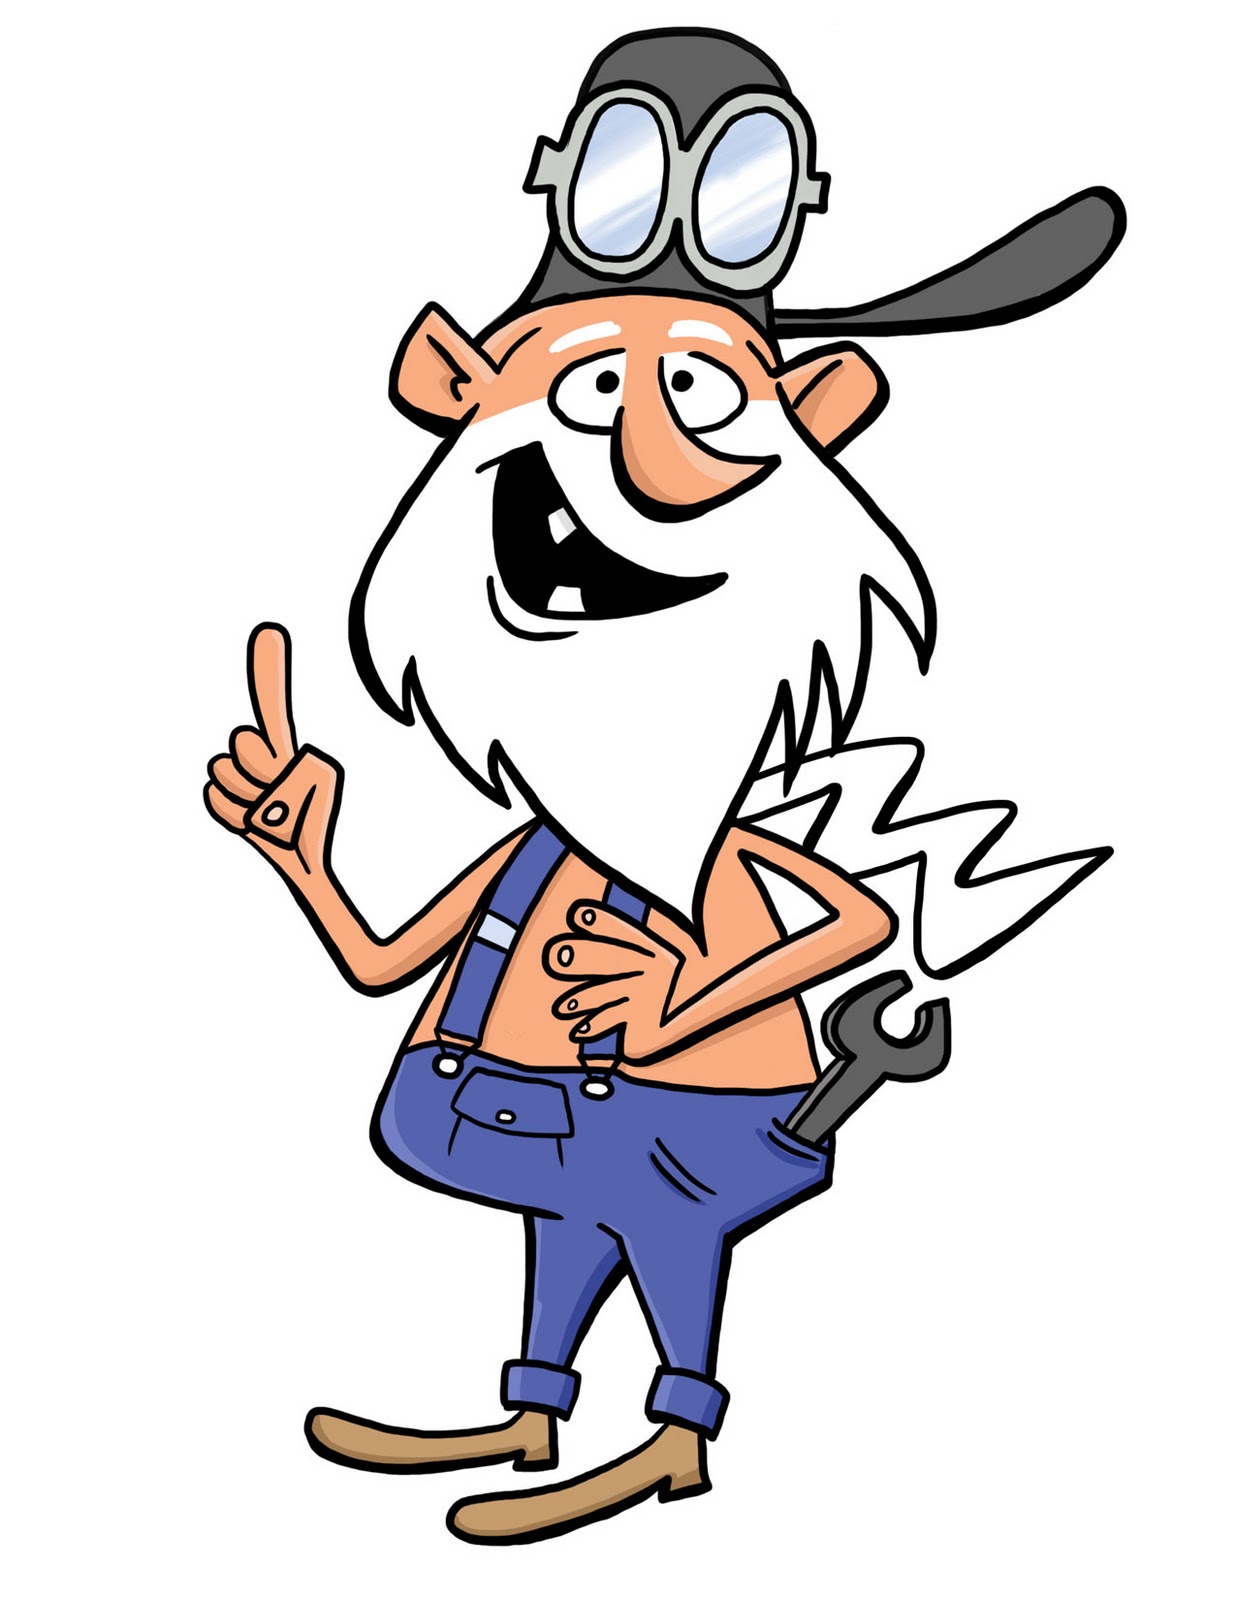 hillbilly clipart person